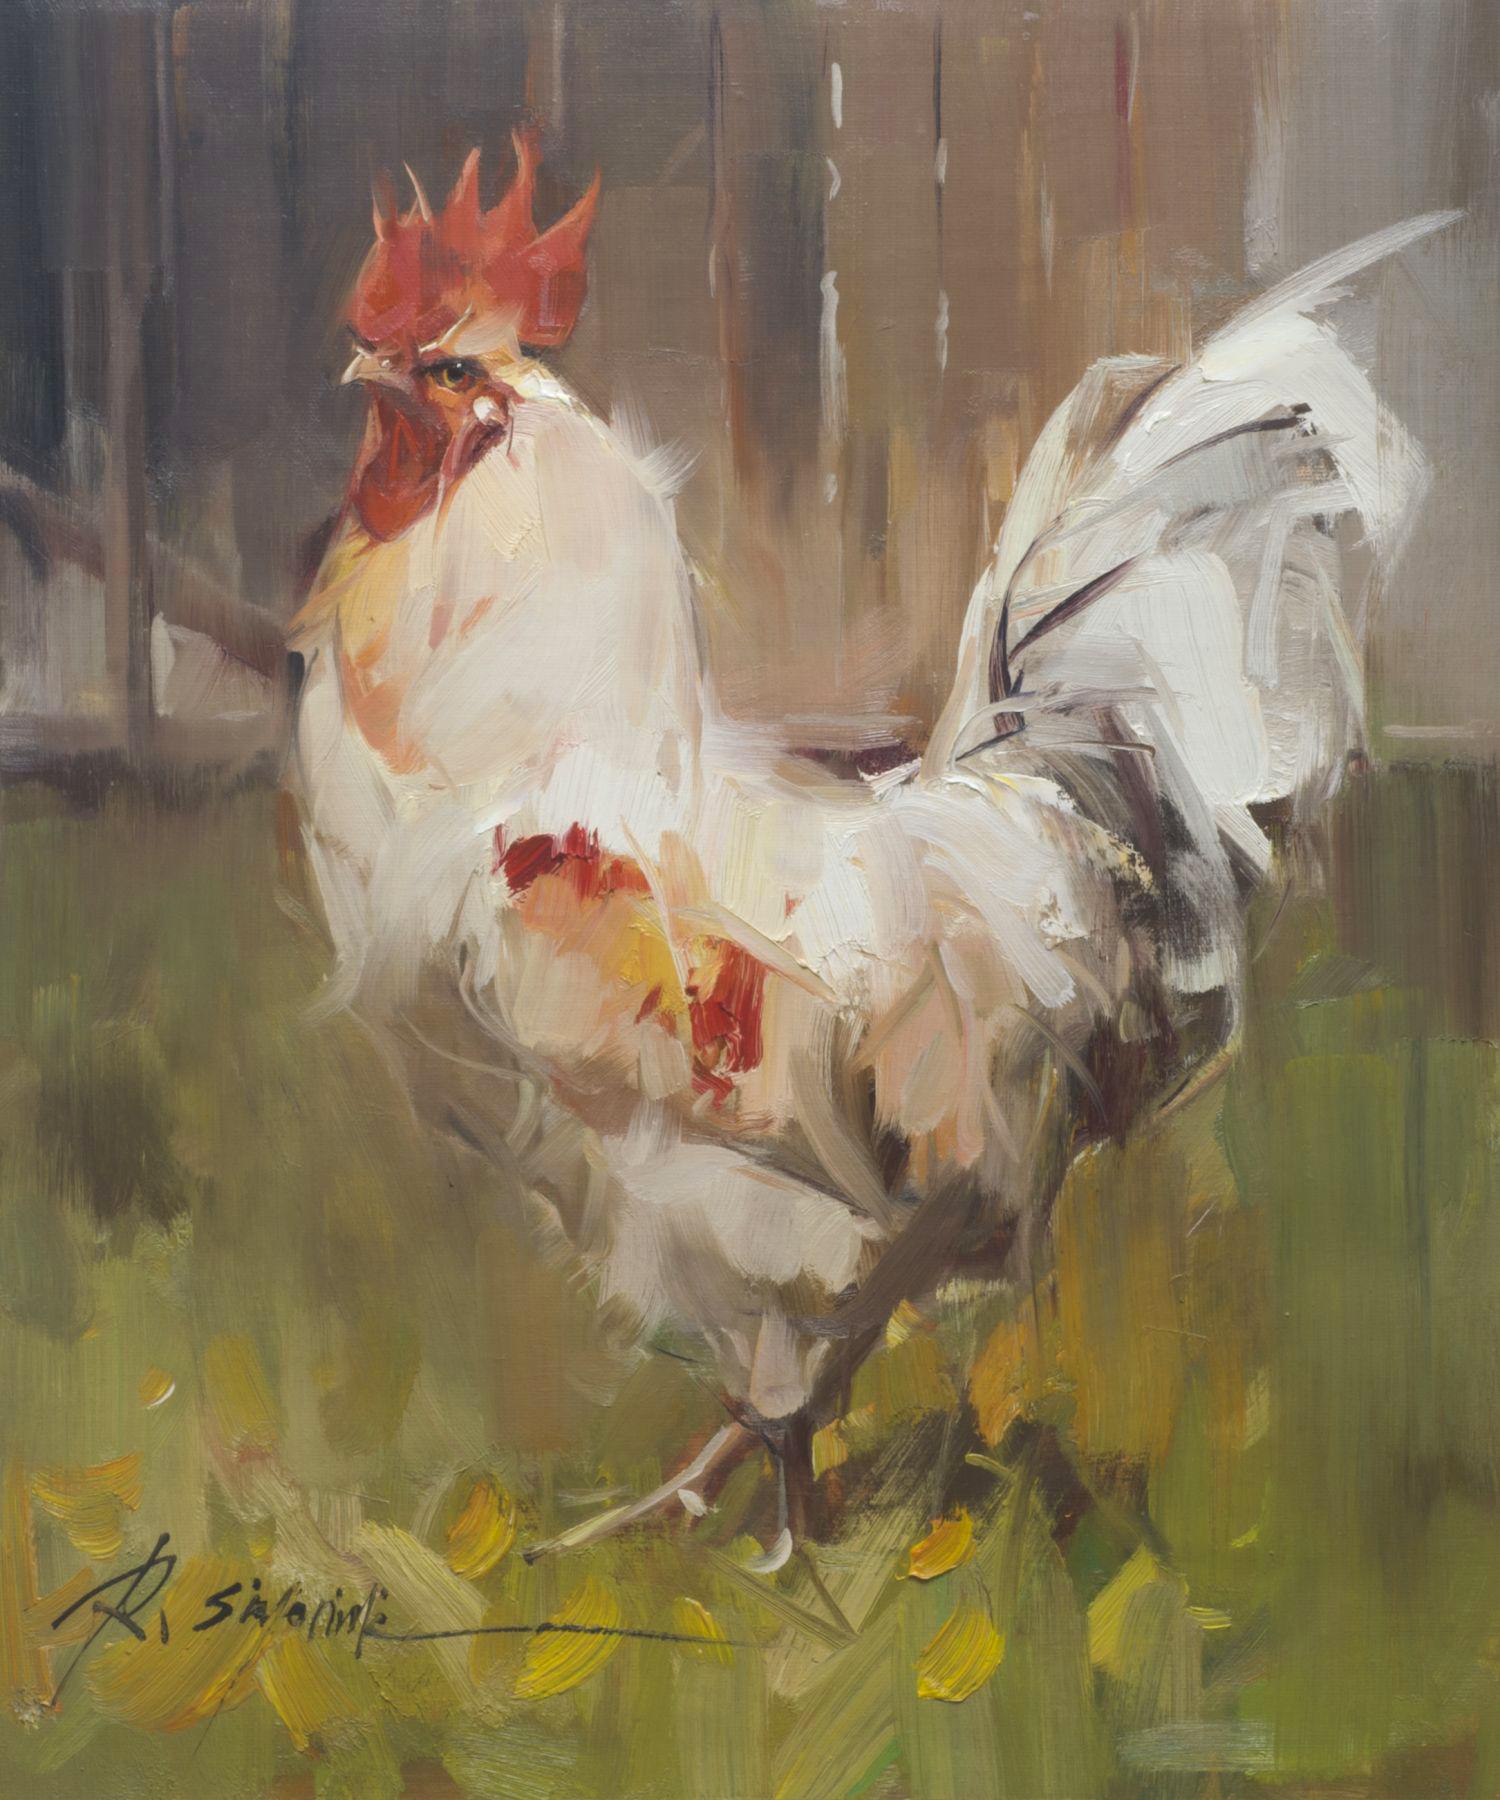 This painting by artist Ray Simonini titled "Bowie" is a 24x20 farm animal oil painting on canvas featuring a portrait of a white rooster walking outside the barn in lush green grass. 

About the artist:
Simonini was born in China in 1981. He became